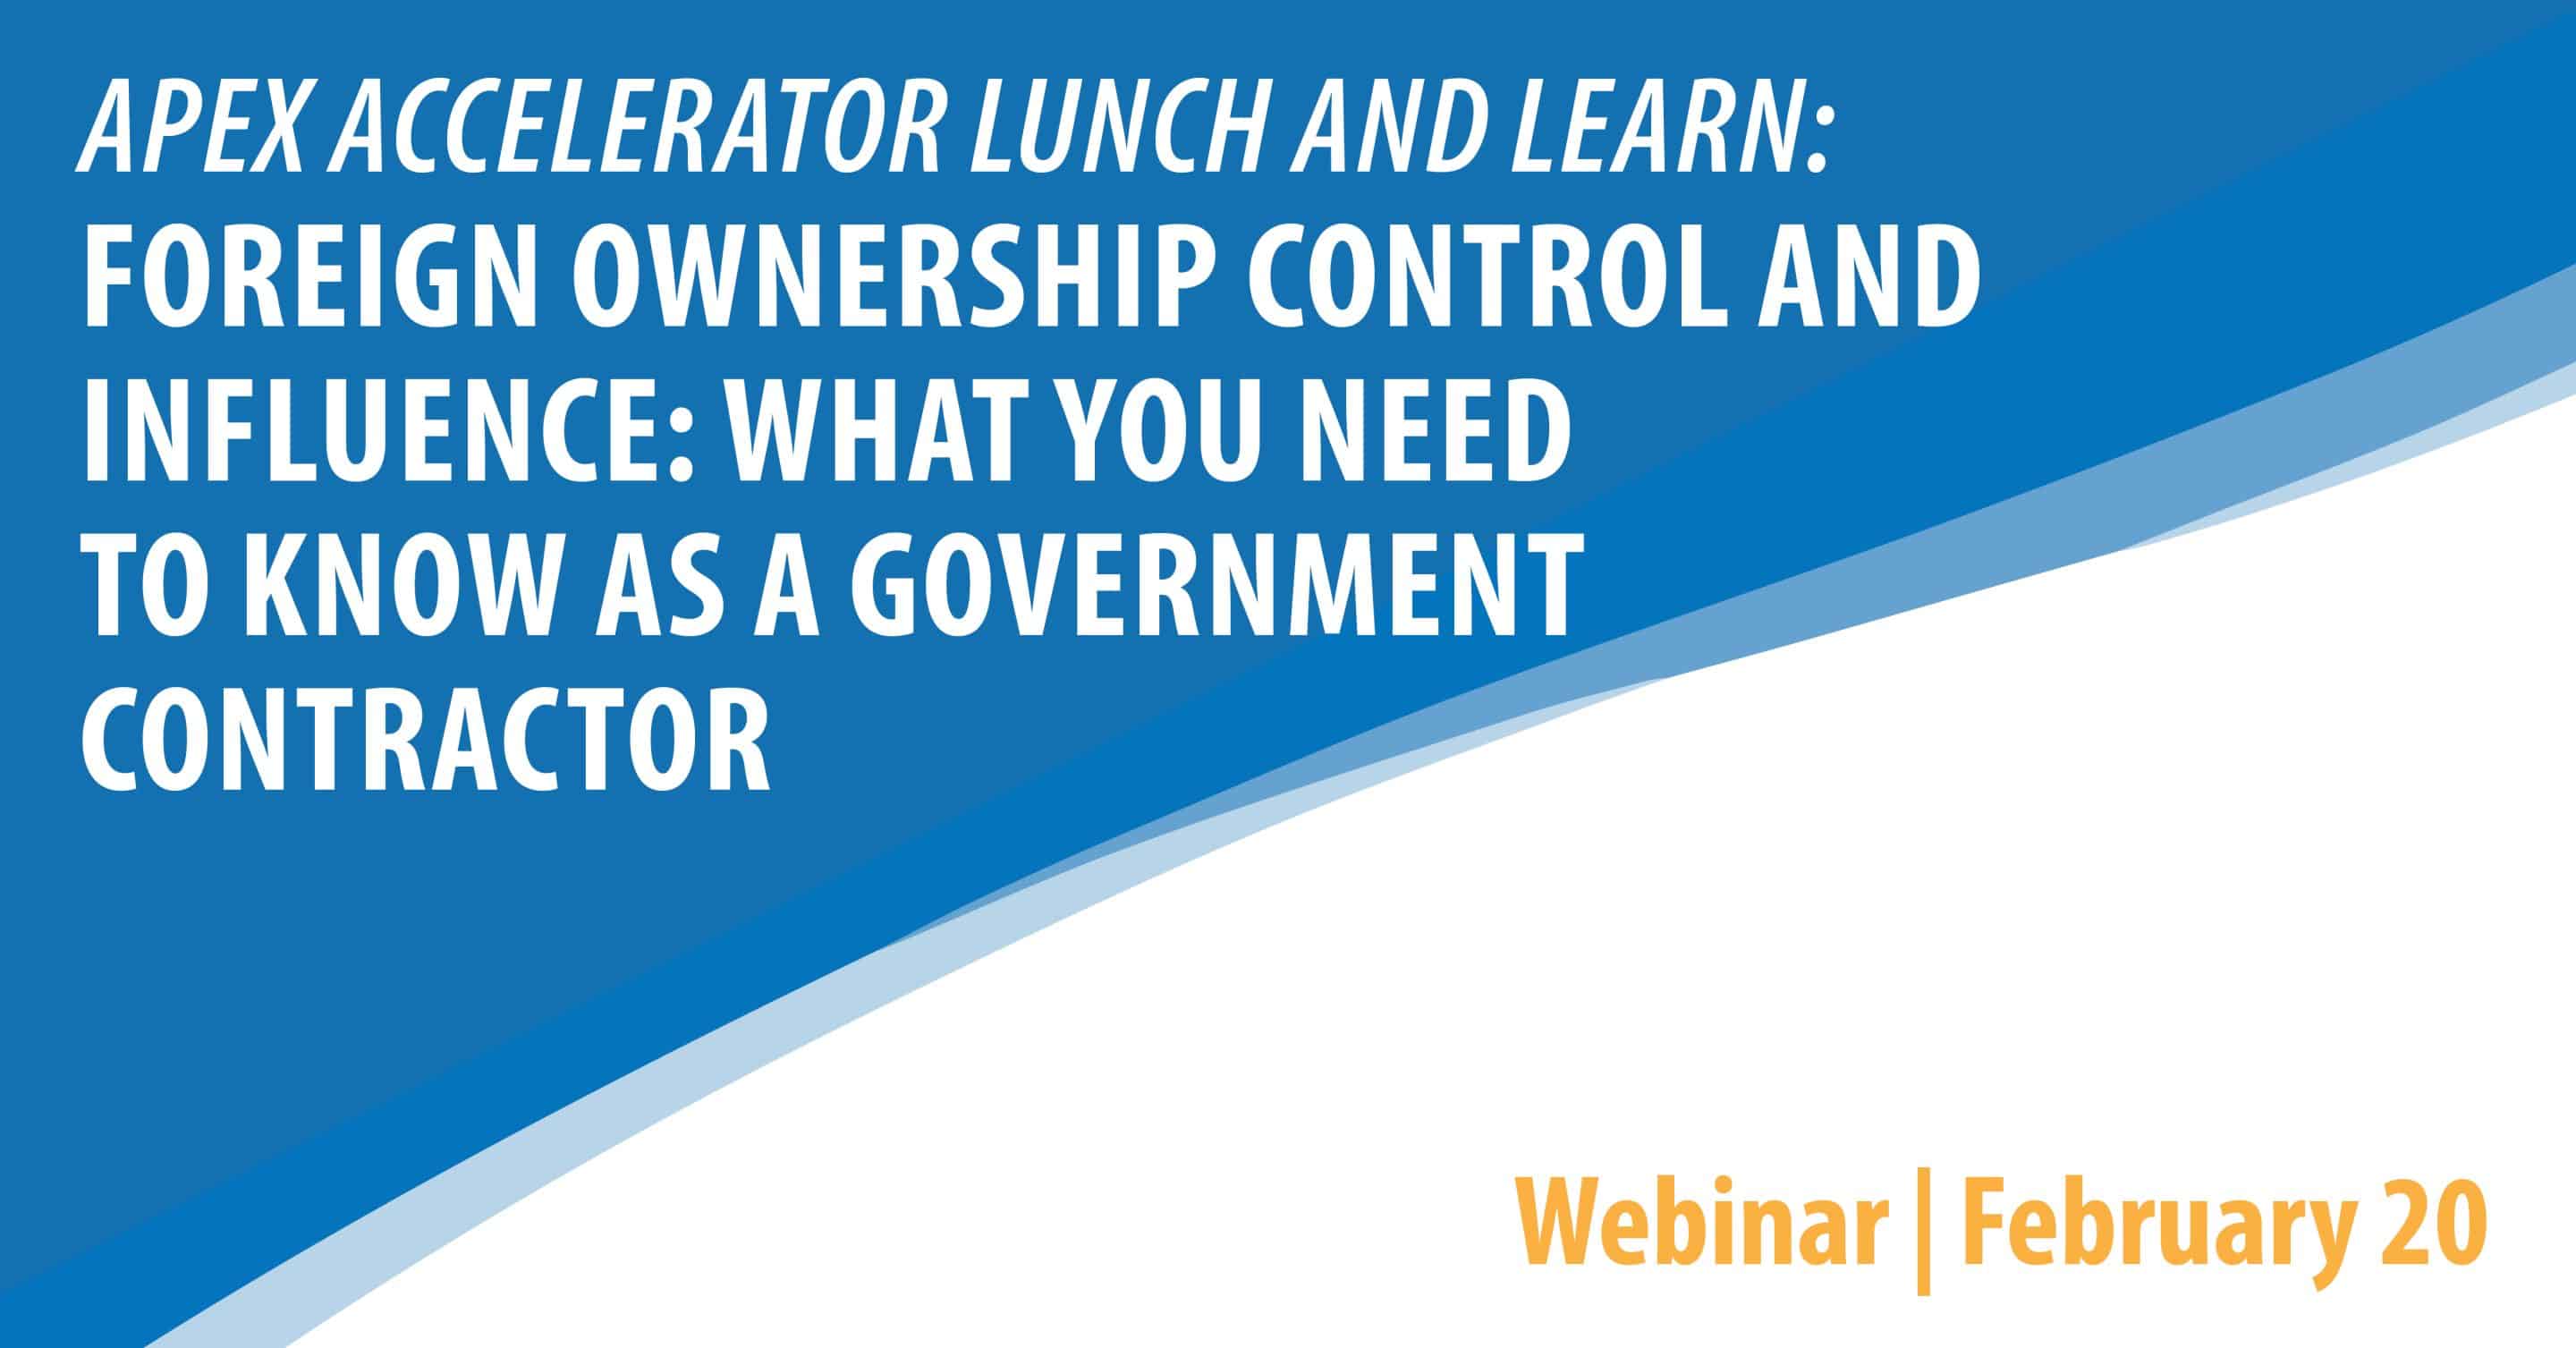 APEX Accelerator Lunch & Learn: Foreign Ownership Control and Influence: What You Need to Know as a Government Contractor